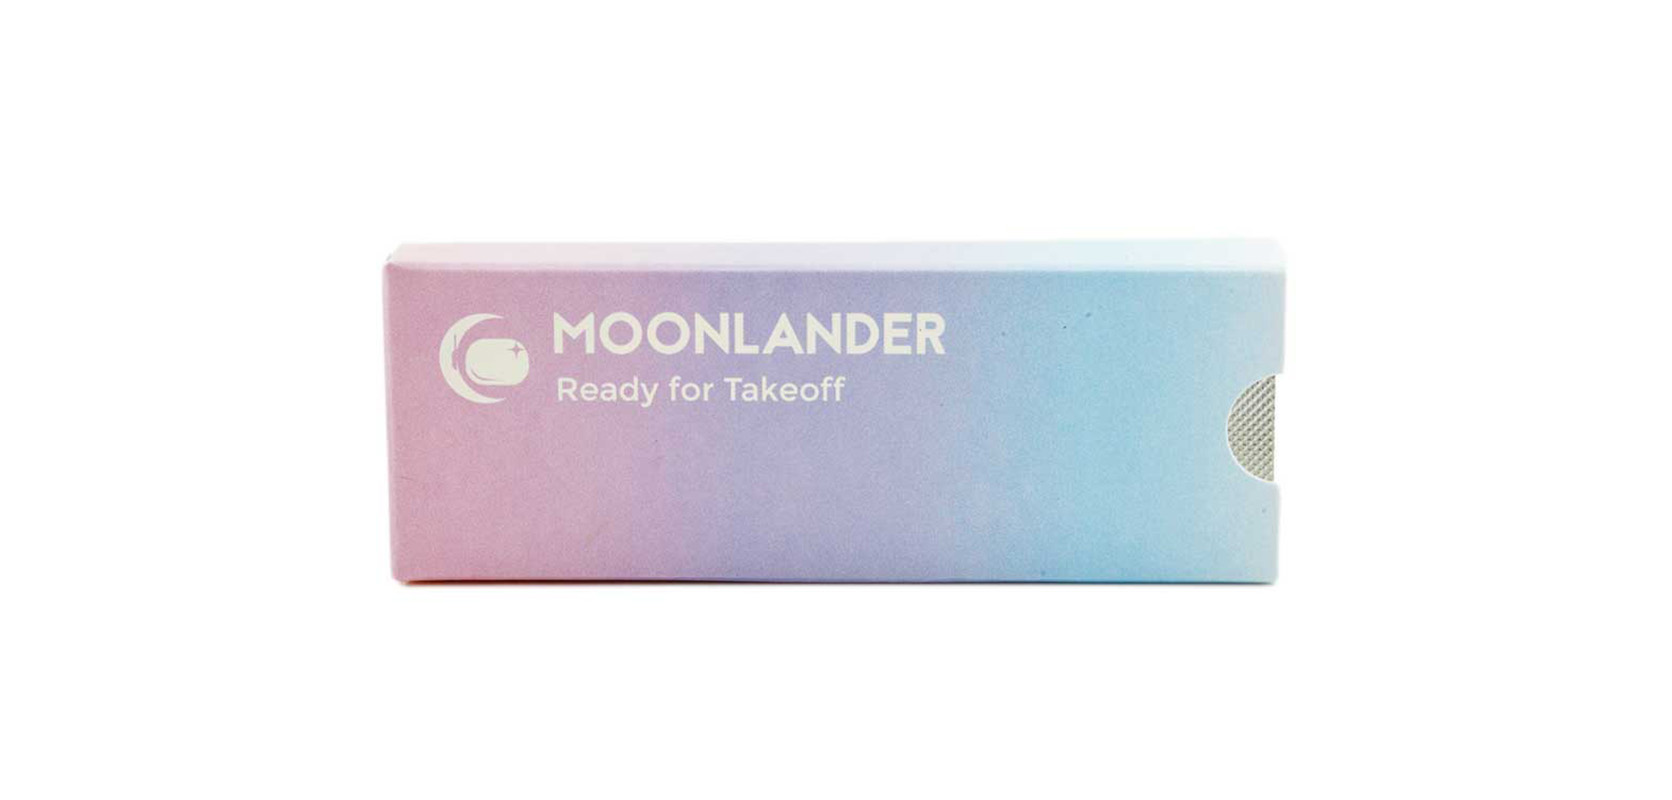 Moonlander Capsules. Moon Rock Weed. Online dispensary. Mail order marijuana budget buds and chapweed.